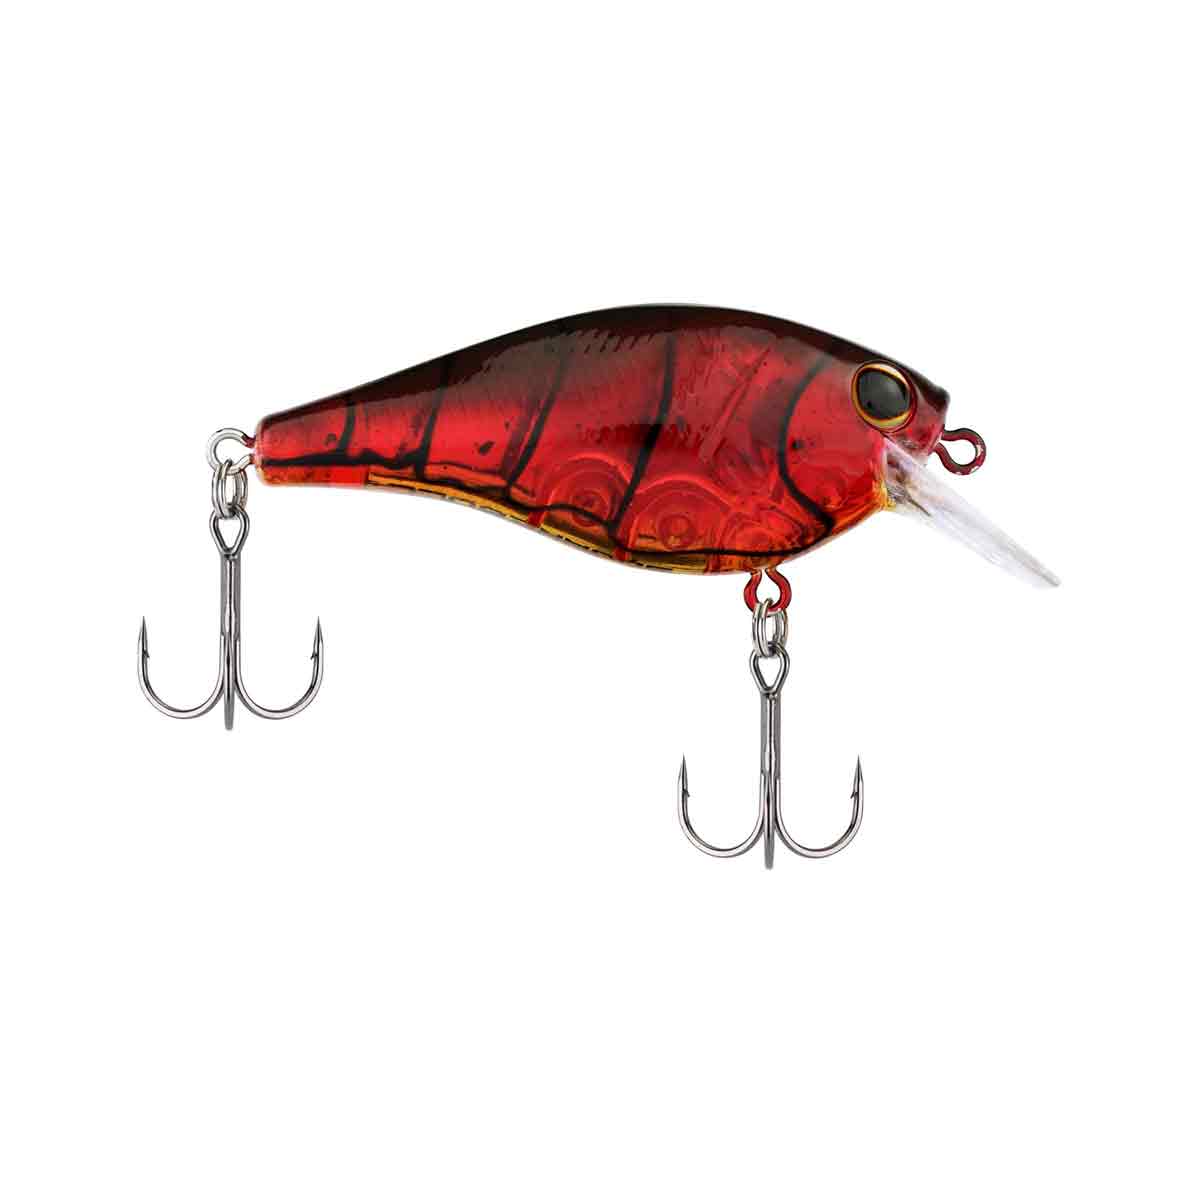 Squarebull_Ghost Red Craw